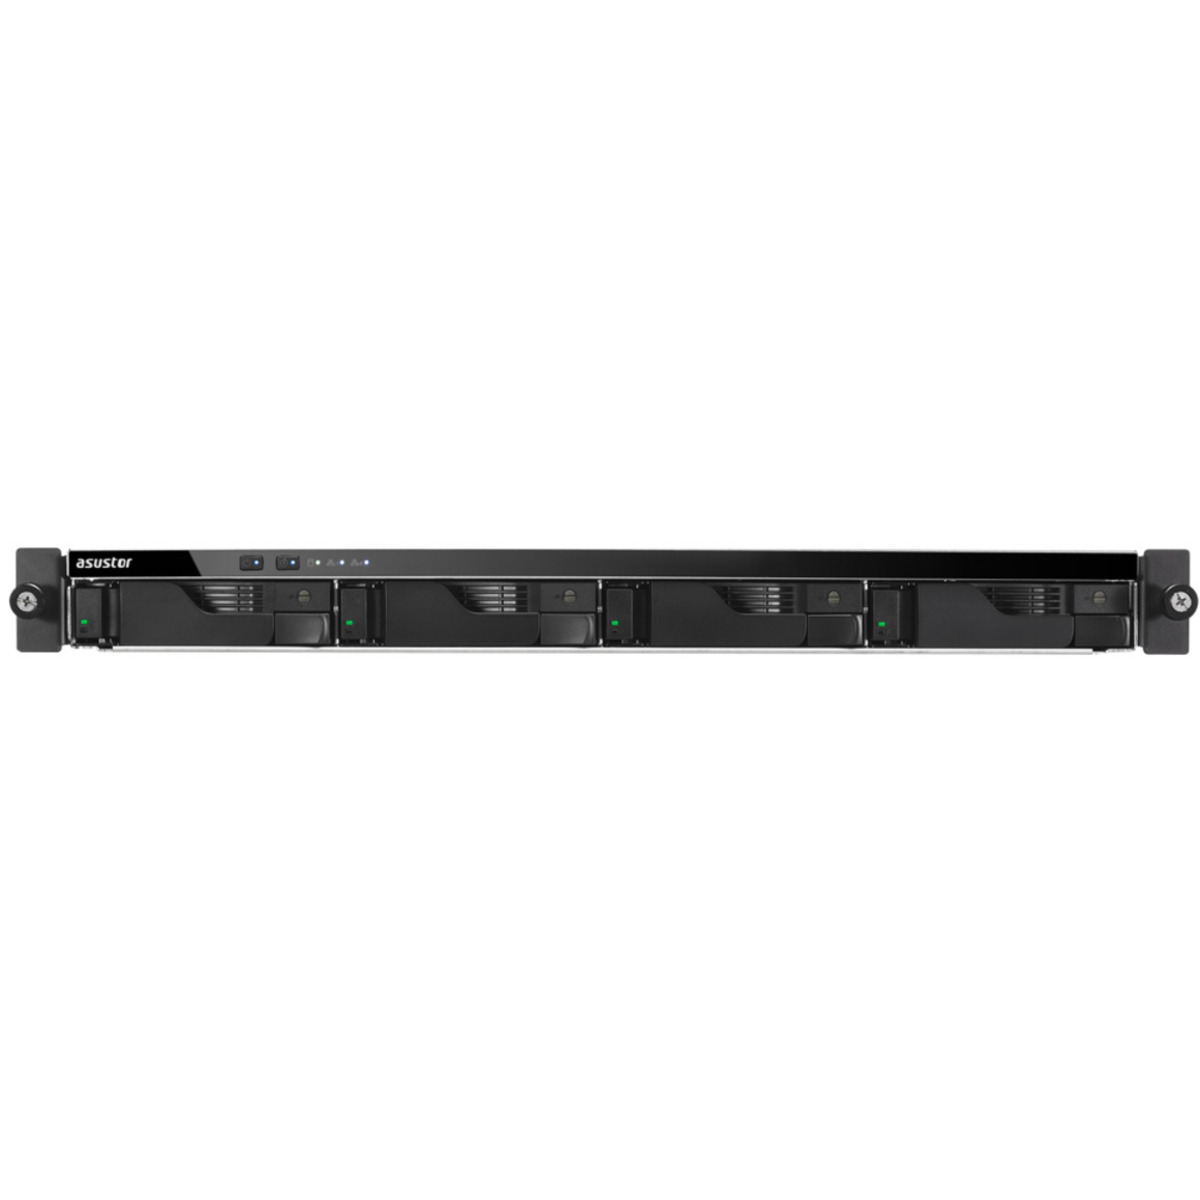 ASUSTOR LOCKERSTOR 4RD AS6504RD 80tb 4-Bay RackMount Multimedia / Power User / Business NAS - Network Attached Storage Device 4x20tb Western Digital Gold WD202KRYZ 3.5 7200rpm SATA 6Gb/s HDD ENTERPRISE Class Drives Installed - Burn-In Tested - FREE RAM UPGRADE LOCKERSTOR 4RD AS6504RD